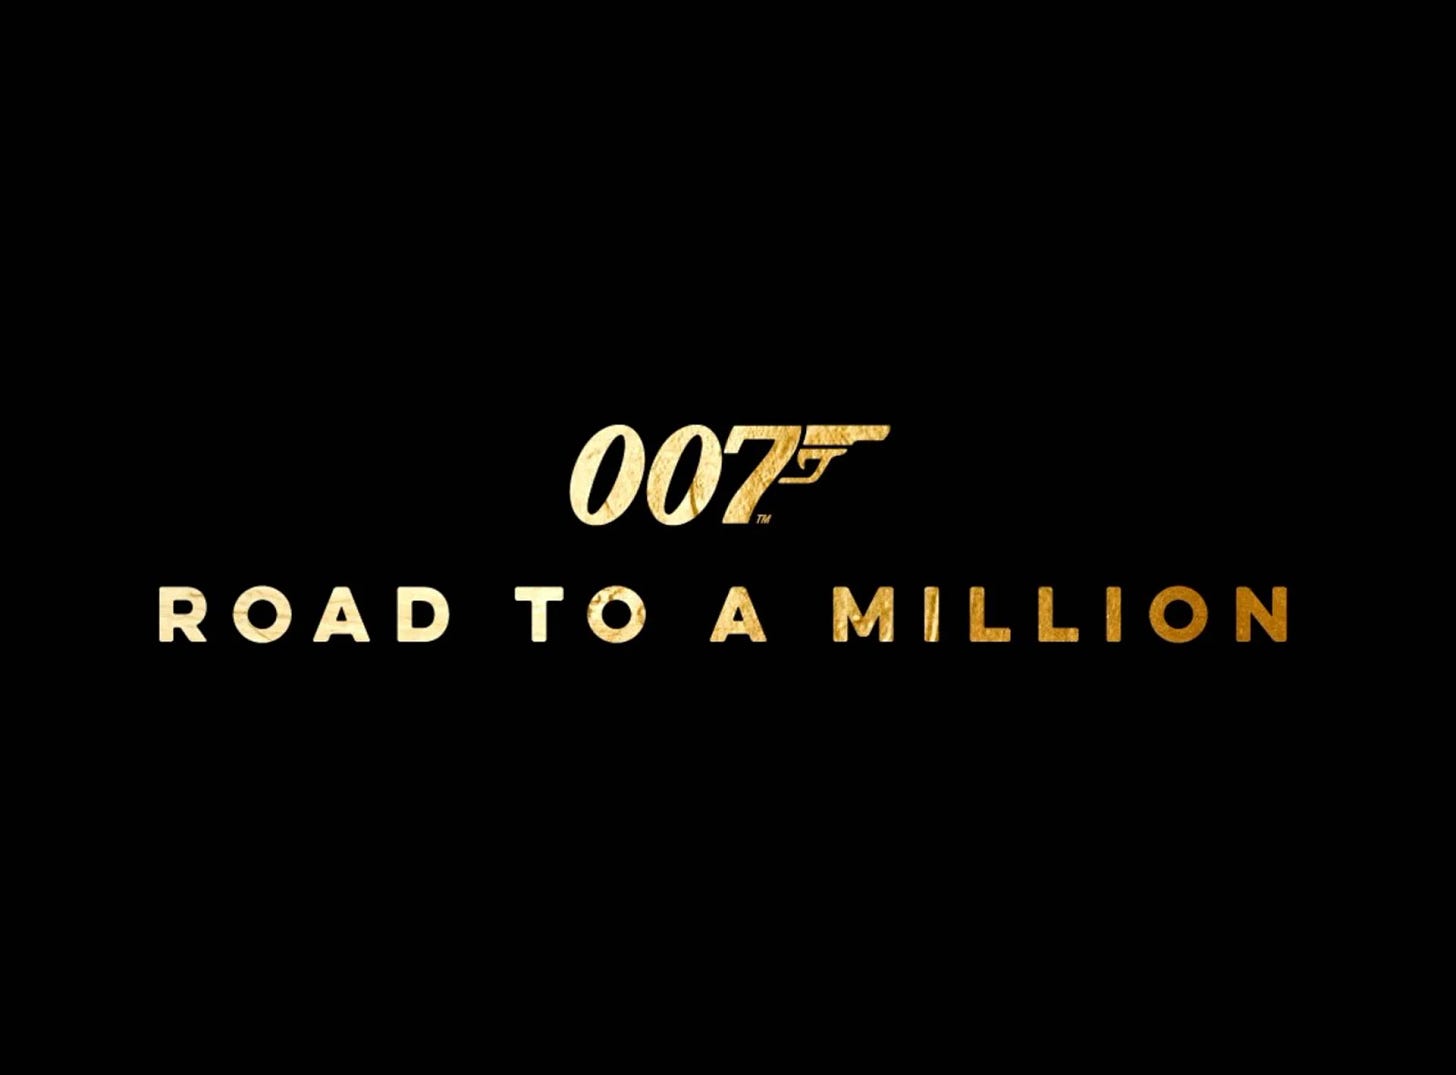 007’s Road To A Million